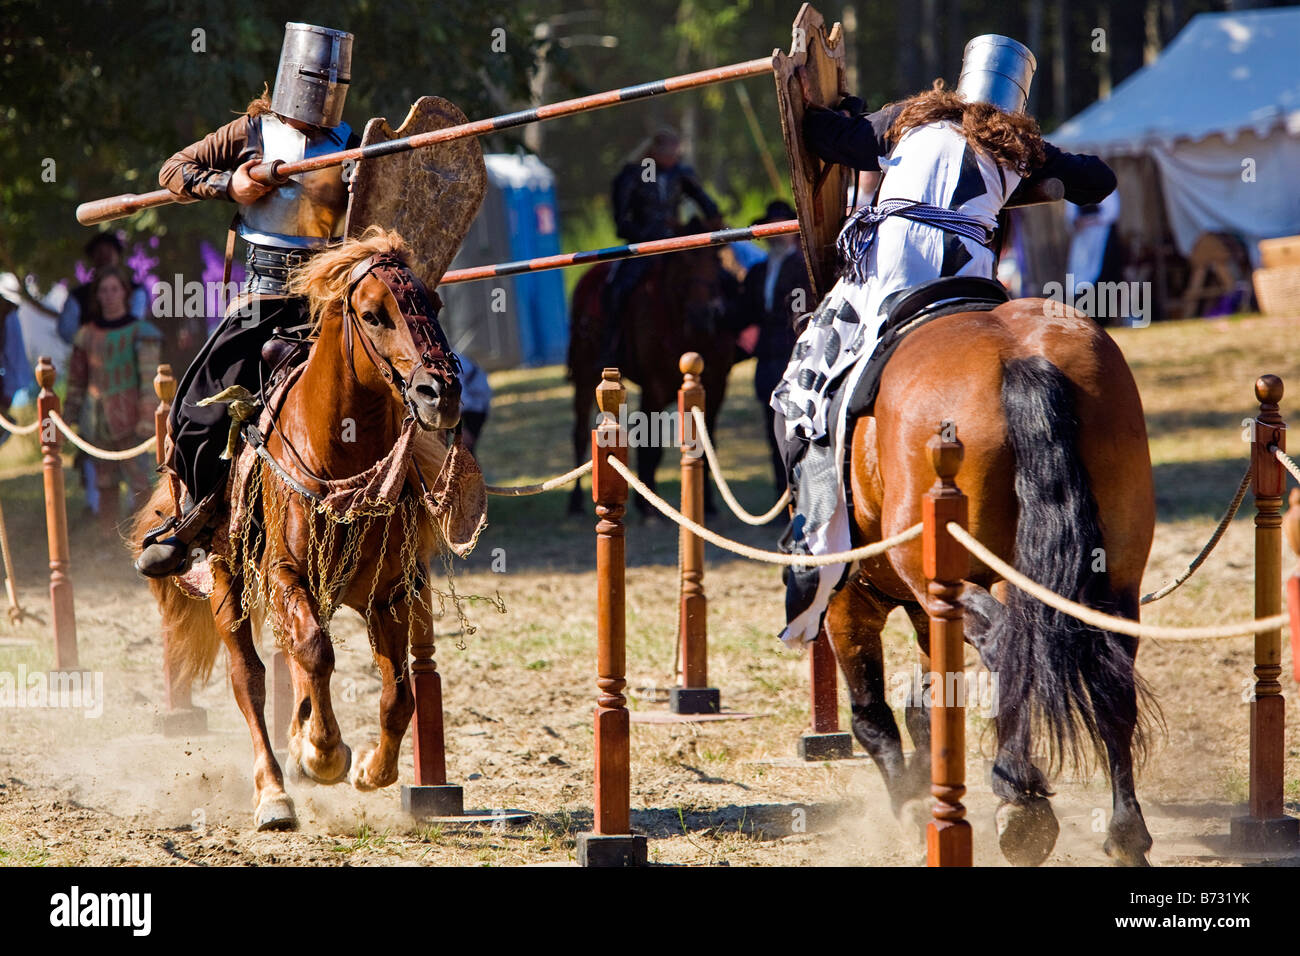 Image of two men dressed in Medieval style clothing riding a horses and carrying a lance in a jousting tournament Stock Photo